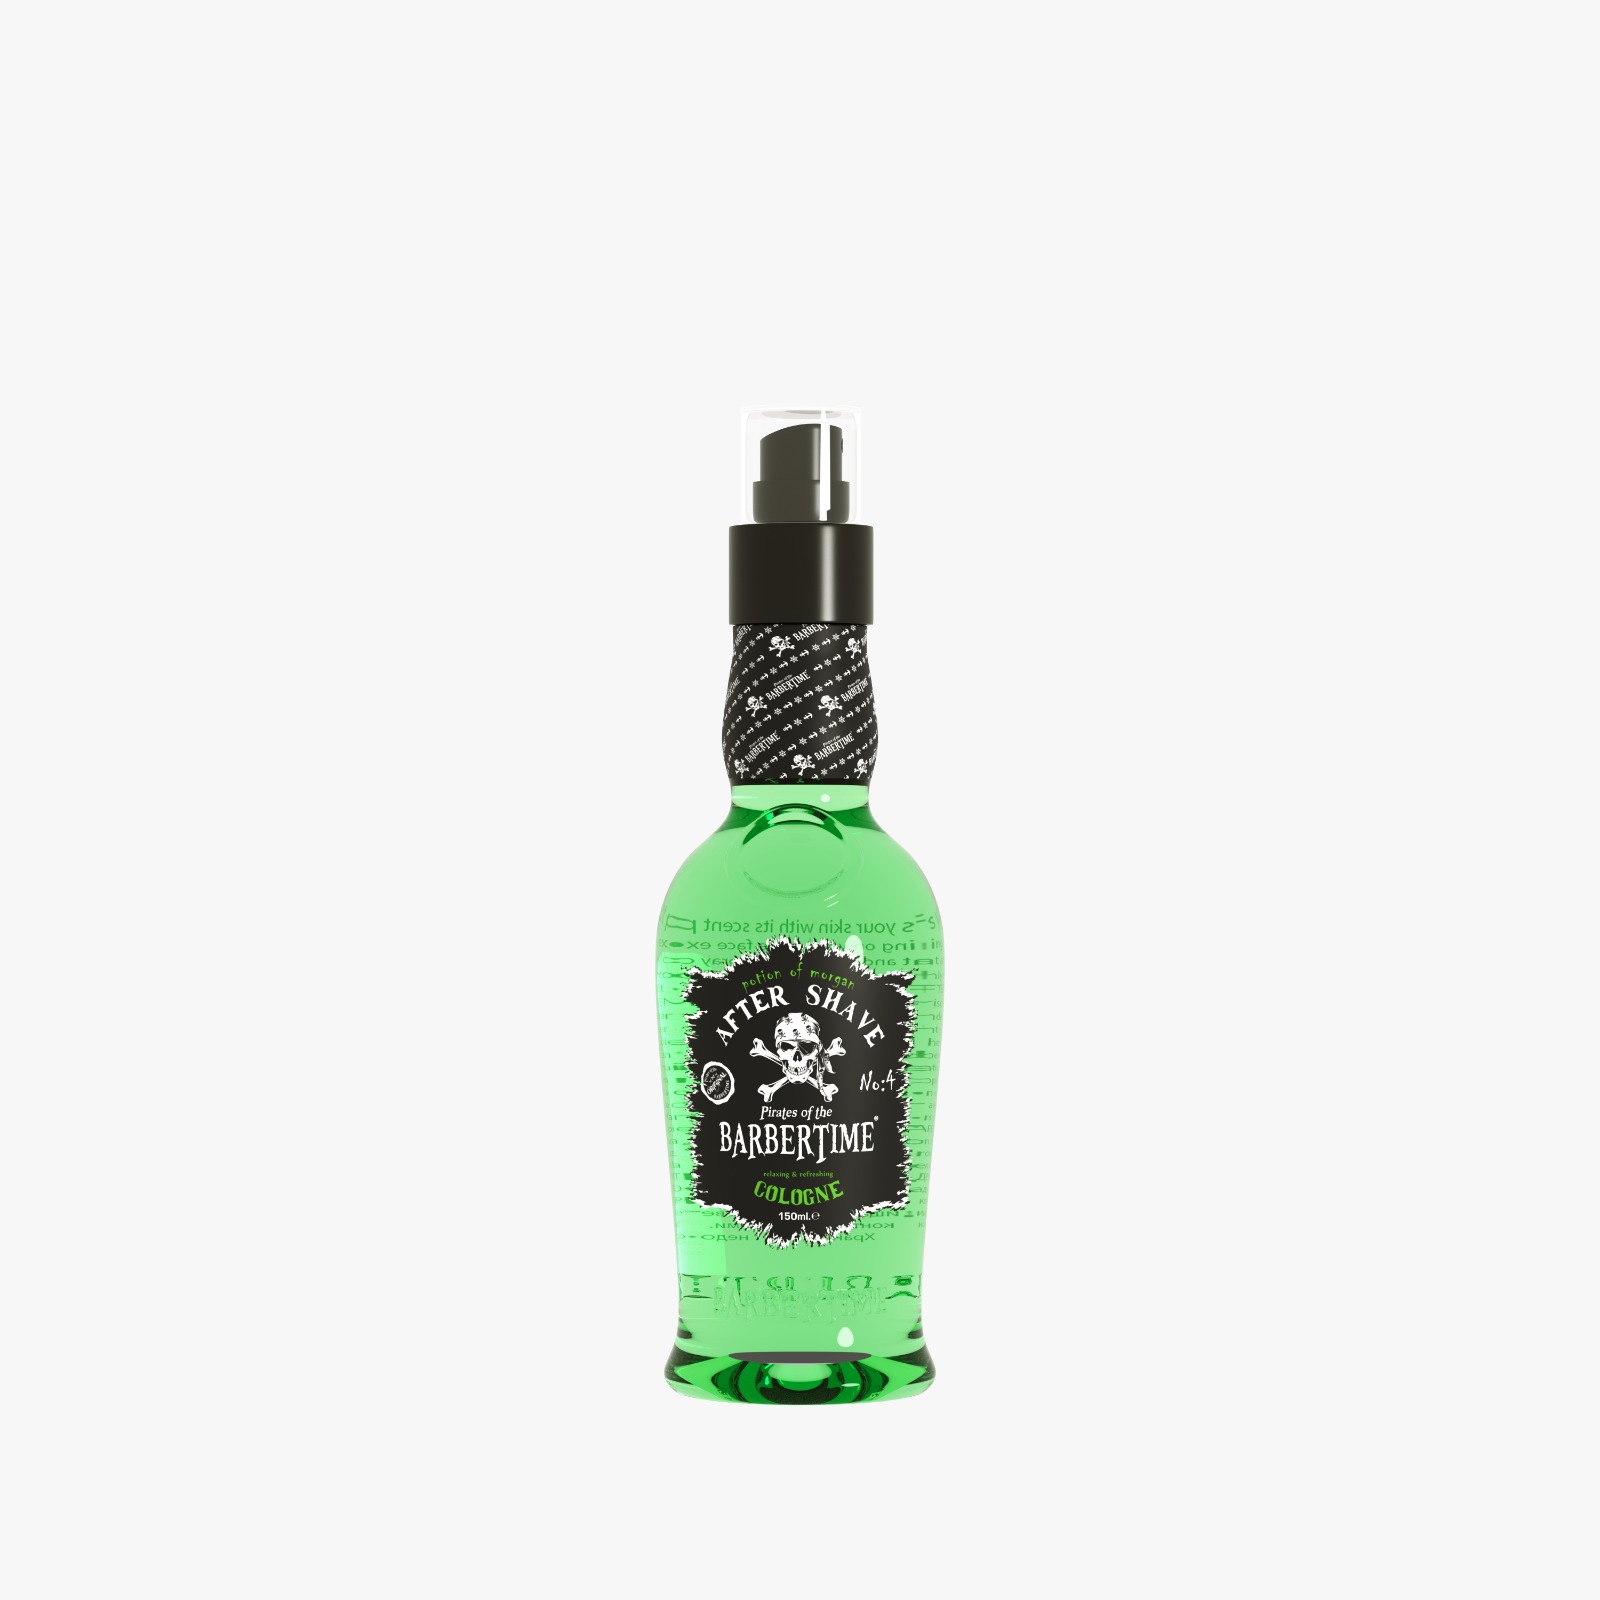 BARBERTIME AFTER SHAVE COLOGNE Potion of Morgan N.4 150ml